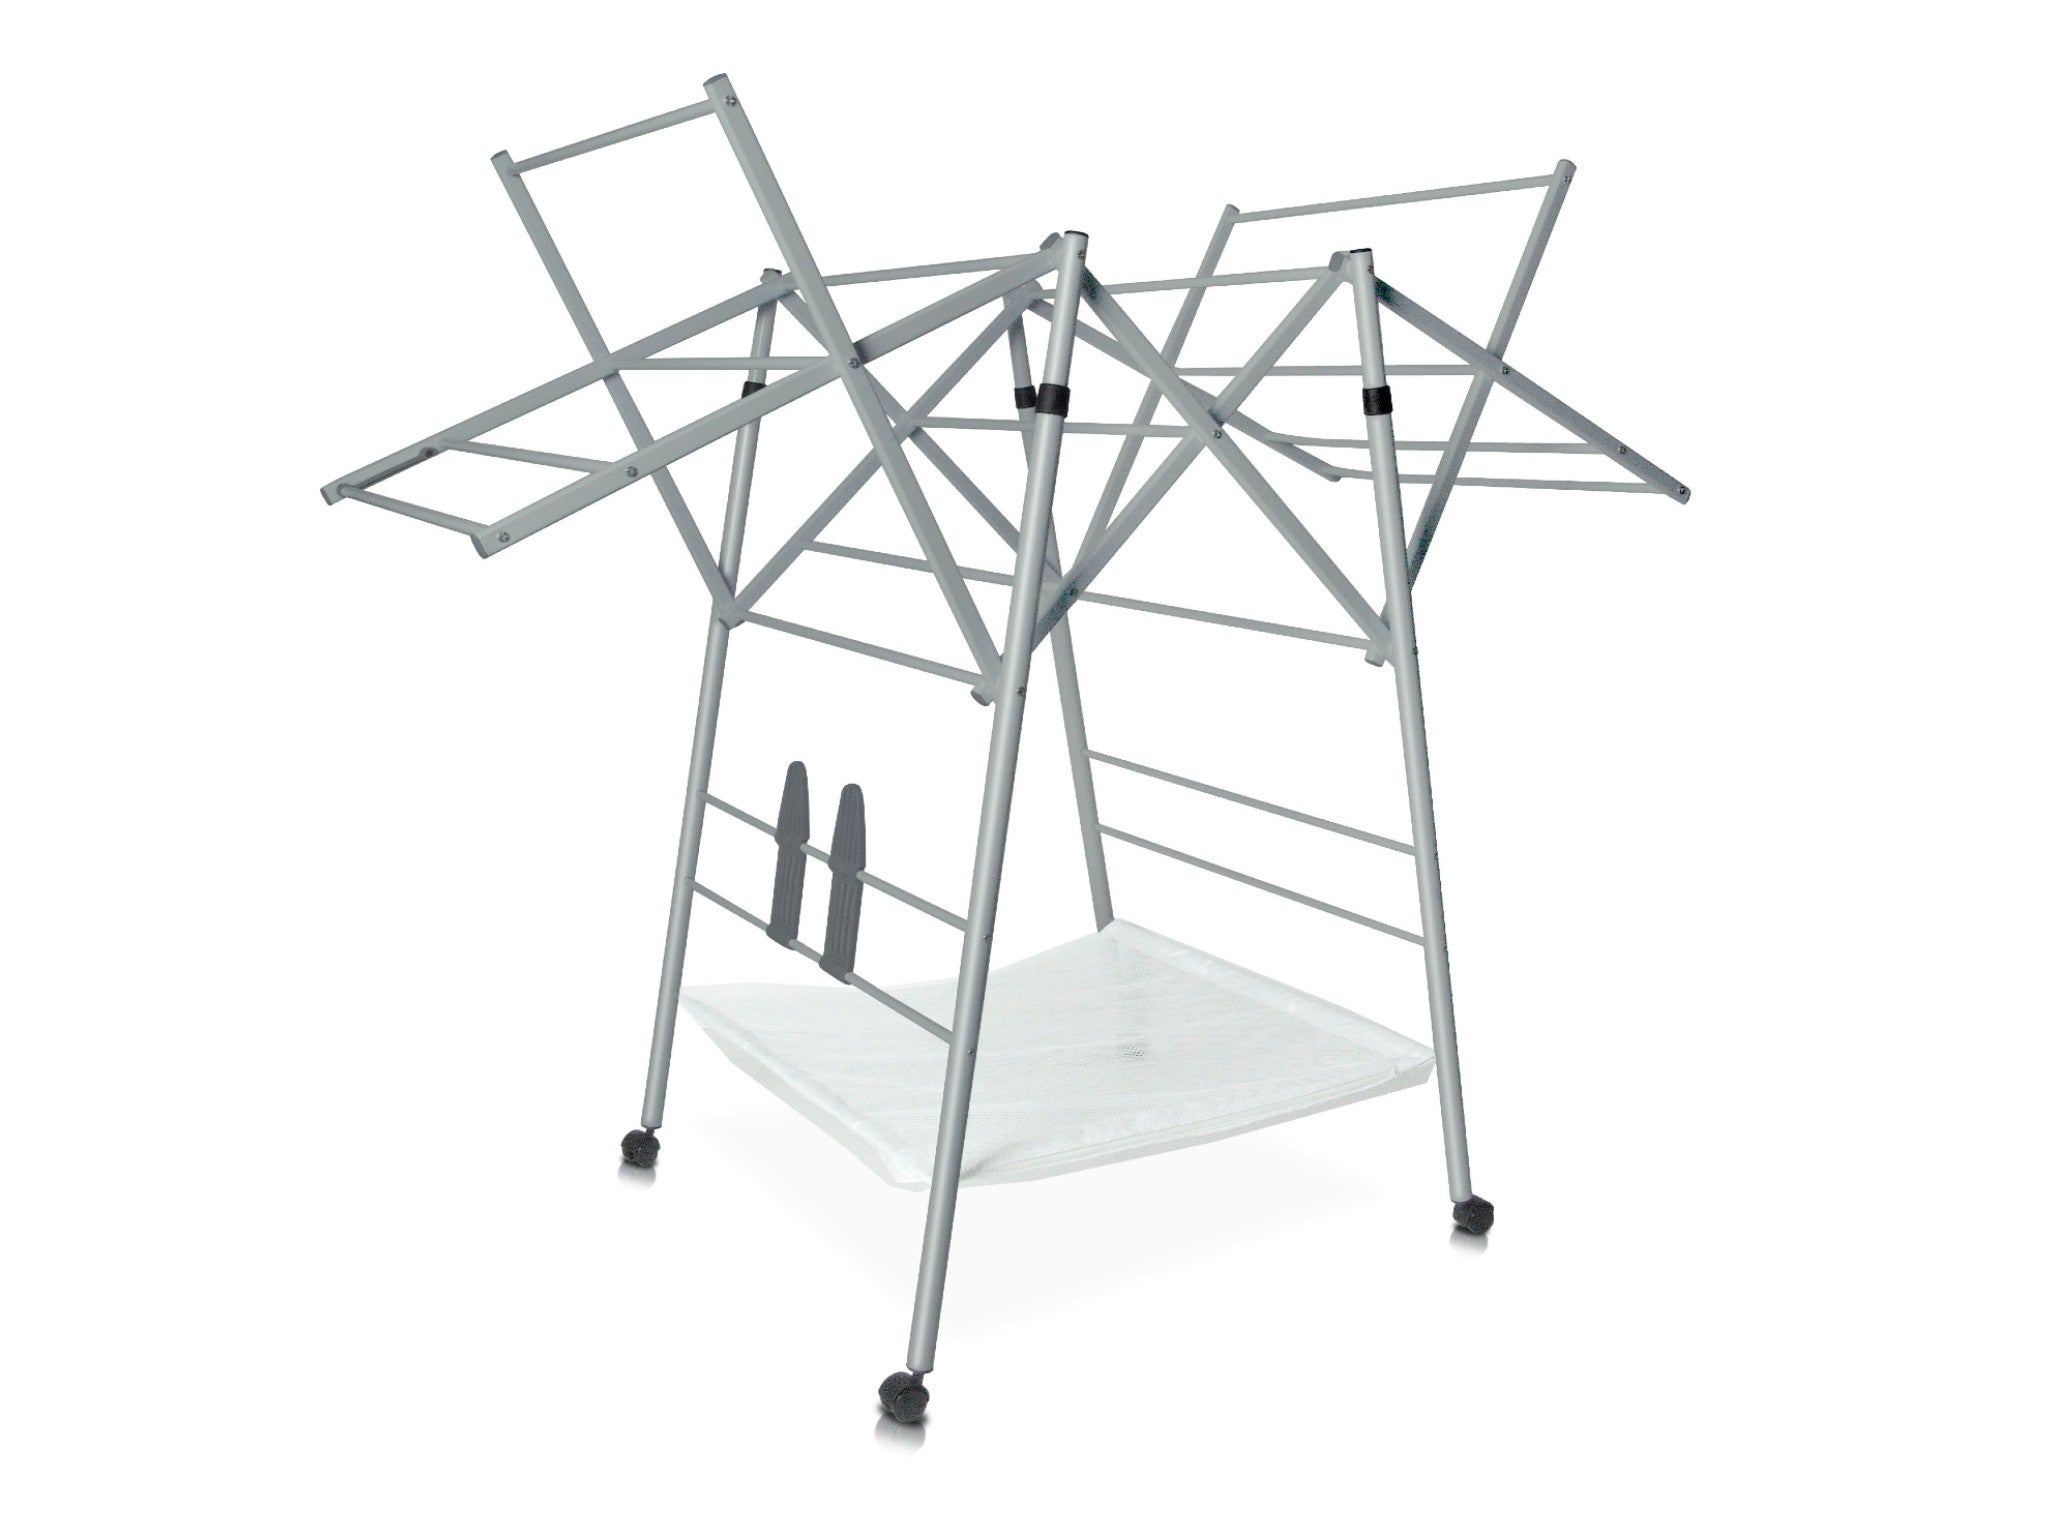 Addis 507938 deluxe superdry airer 11 metres indybest.jpeg